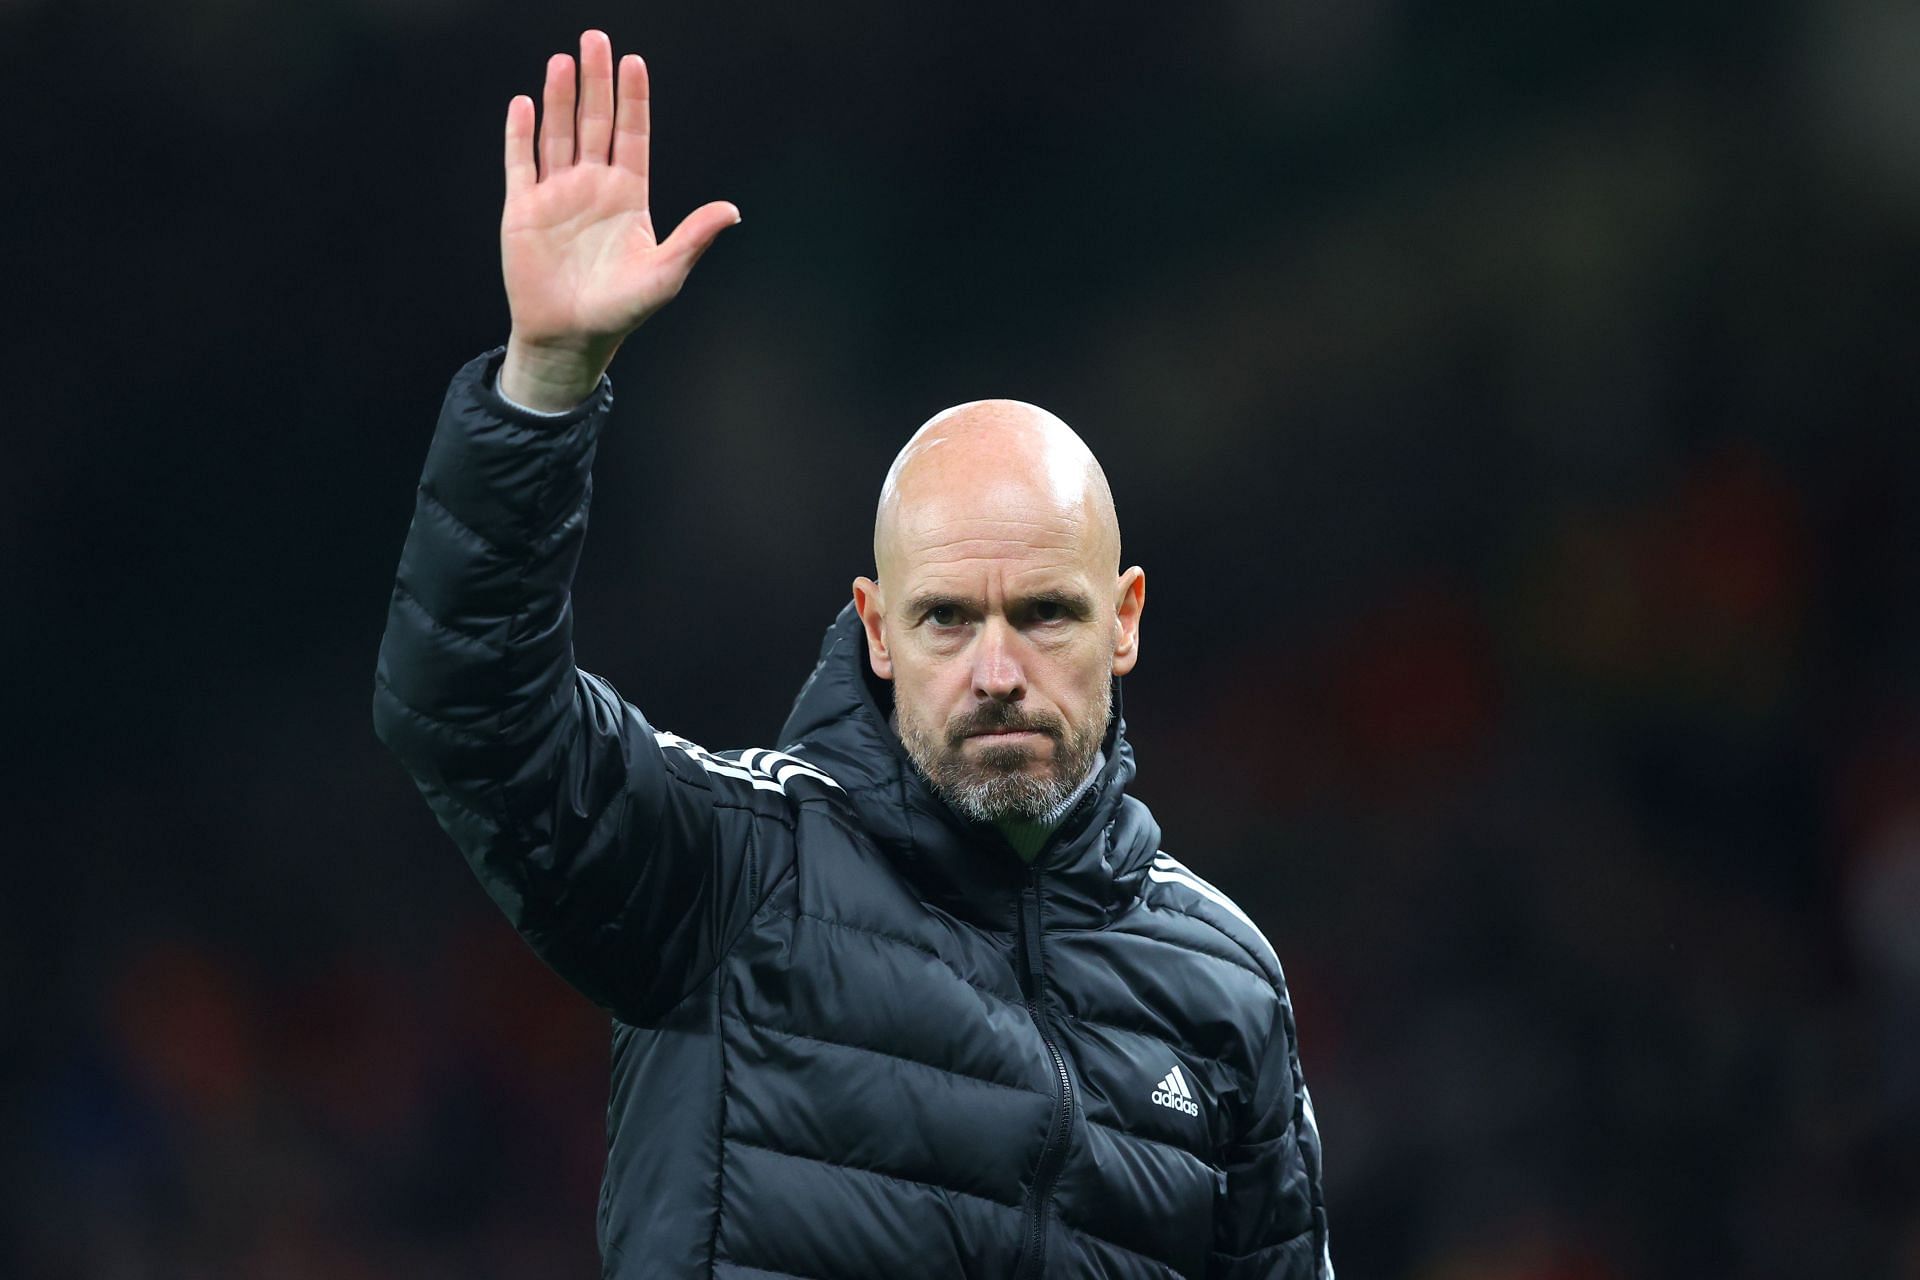 Ten Hag rang in some inspired changes.